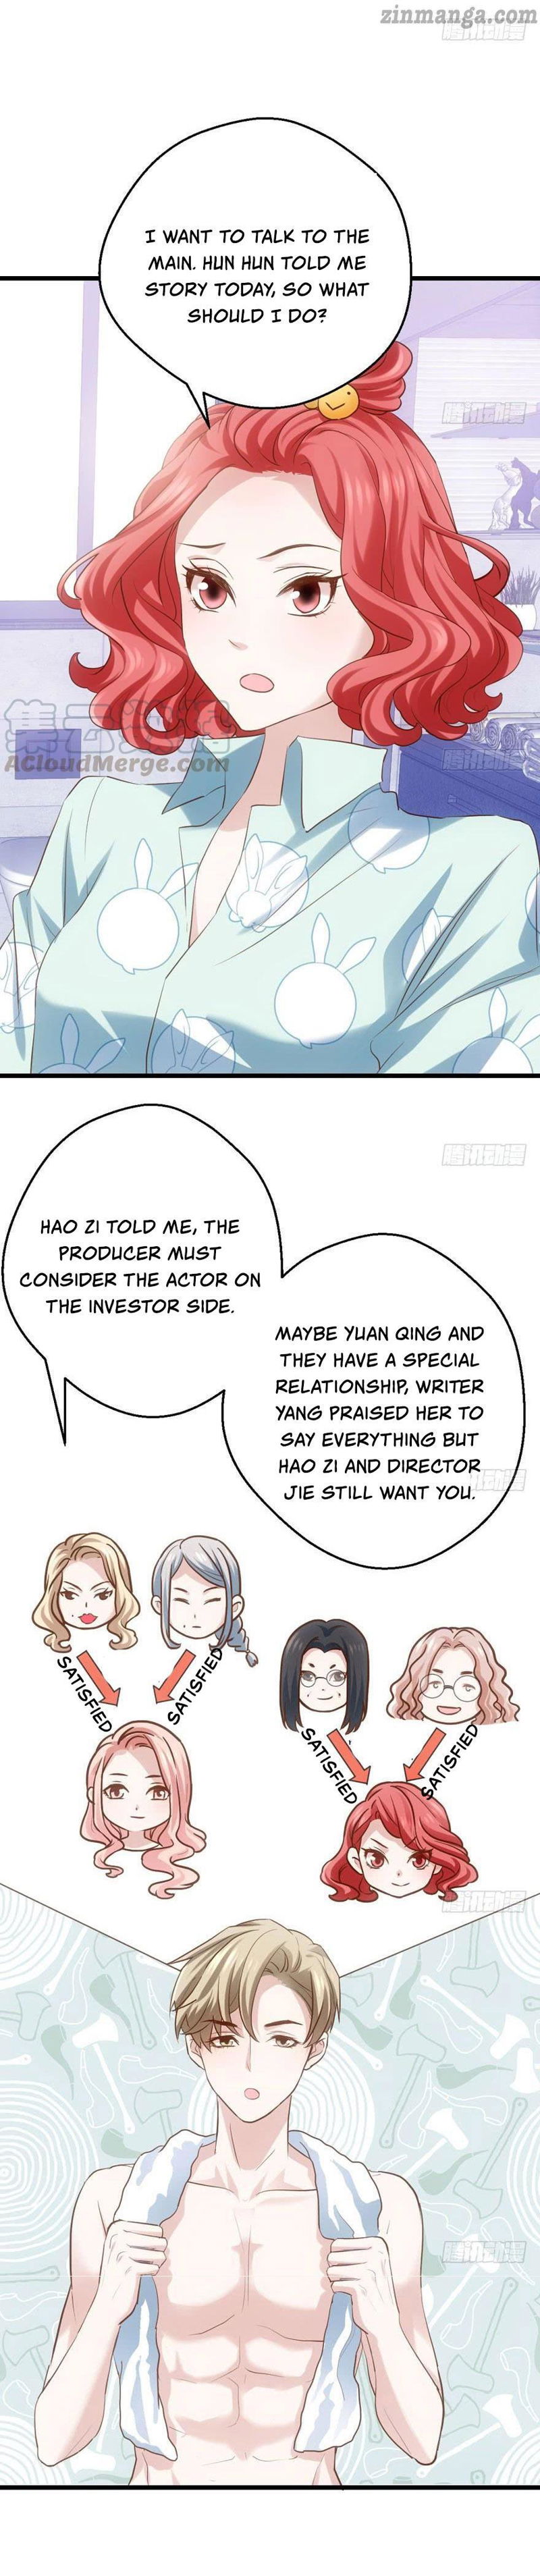 I'm Not An Evil Antagonist Actress Chapter 139 page 7